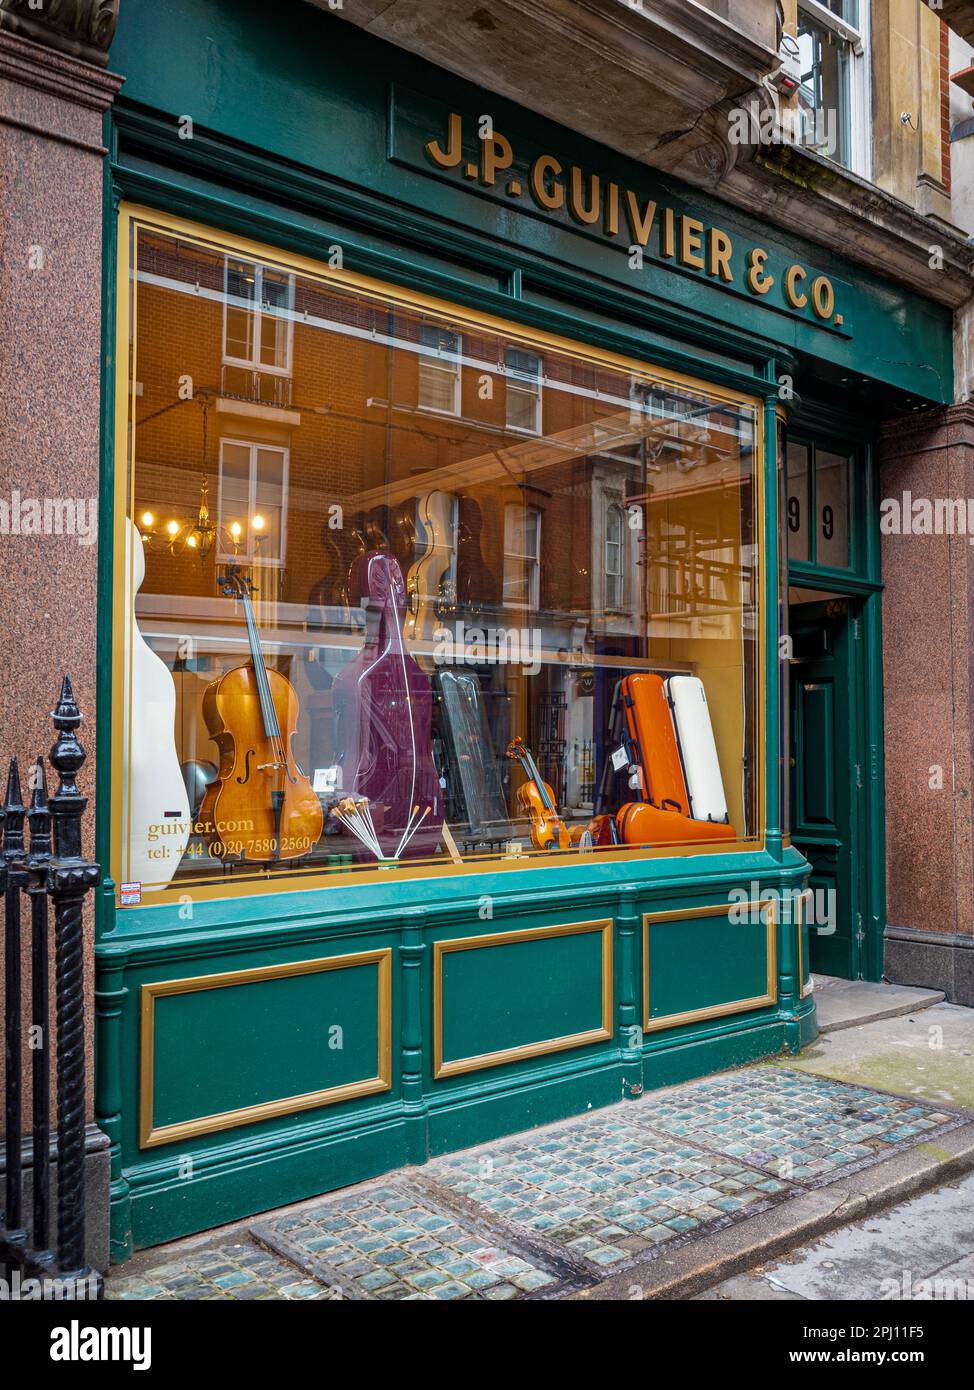 J.P. Guiver & Co London at 99 Mortimer St, London. Musical instrument store. Established in London in 1863. Stock Photo